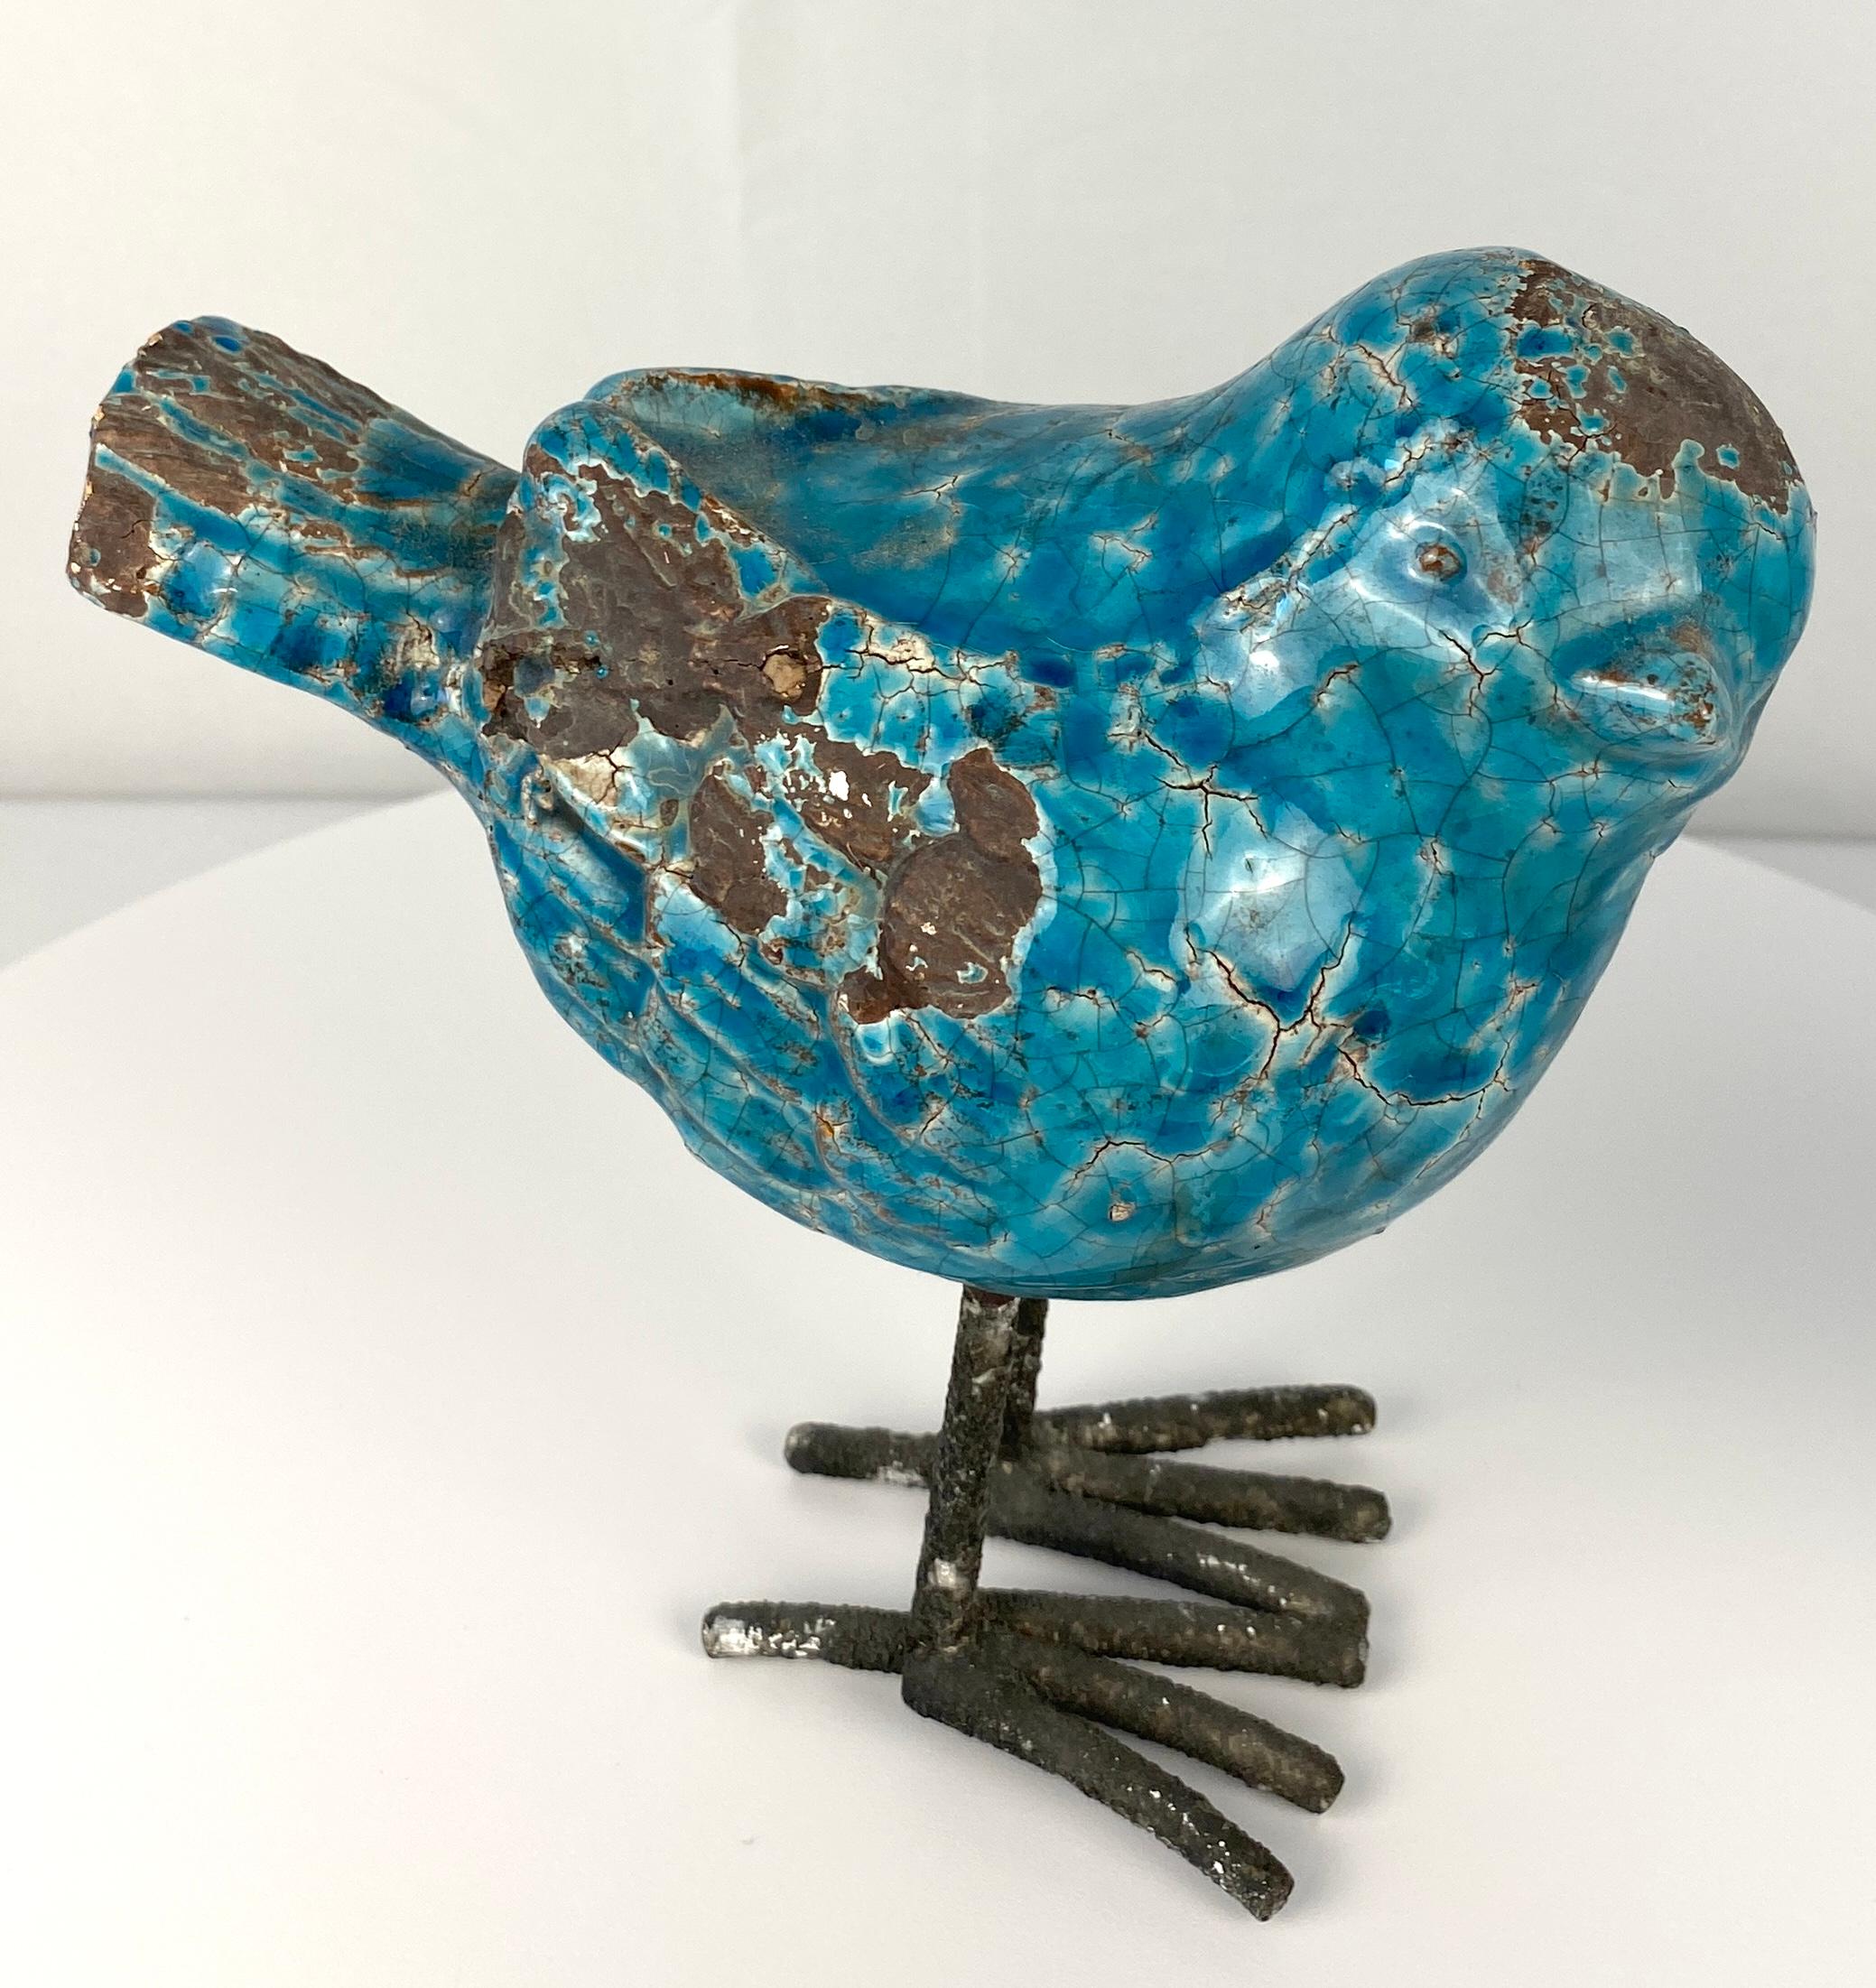 A charming pair of Italian ceramic birds. 

Hand-crafted and hand-painted in a stunning turquoise then glazed, these birds would make a fantastic addition to bookcases, wall shelves, or curio cabinets. 

Will enhance any beach house, contemporary,